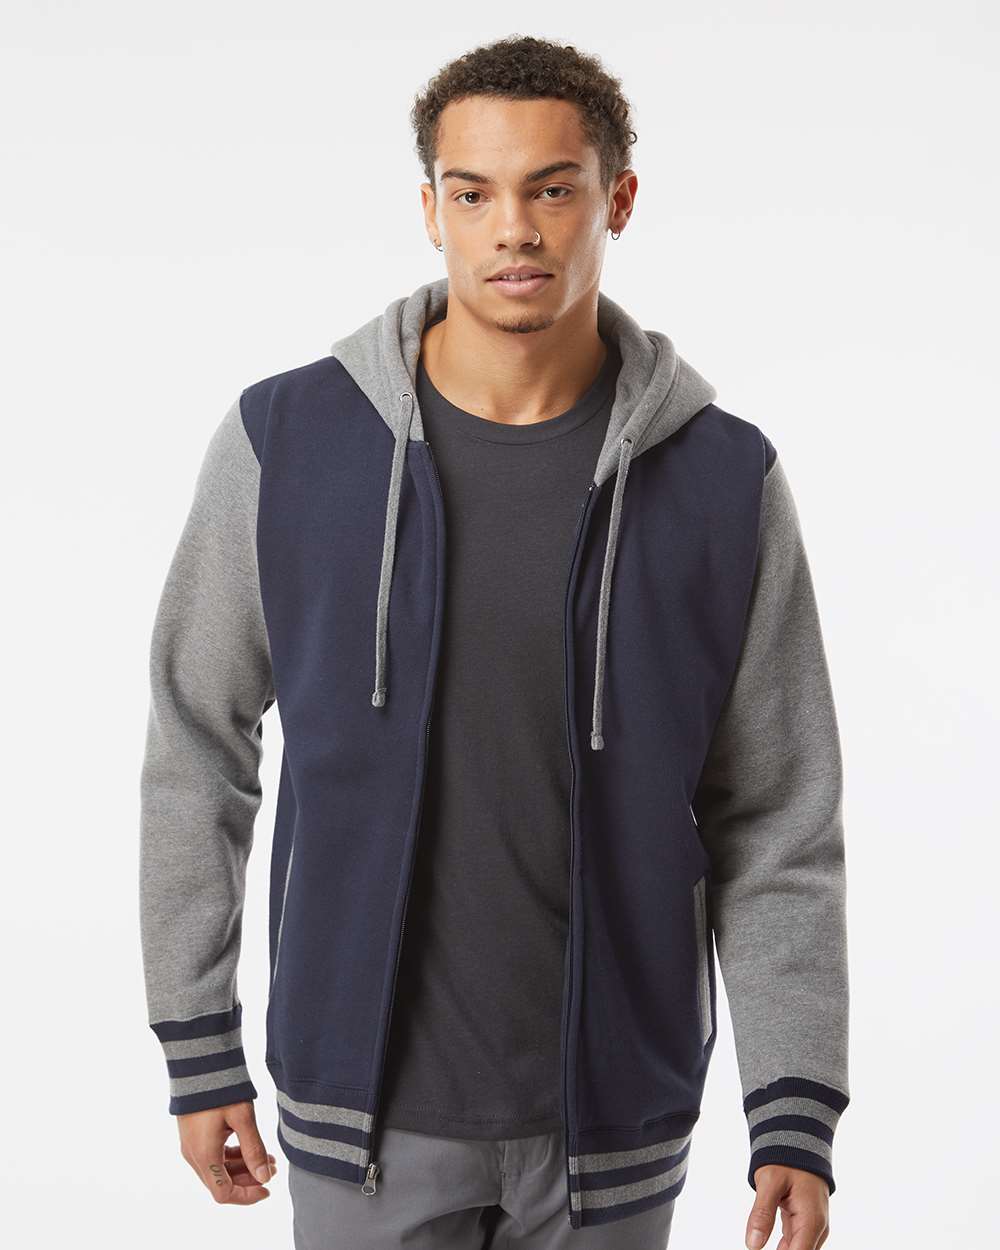 male model wearing independent trading co heavyweight varsity full zip hoodie in classic navy gunmetal heather